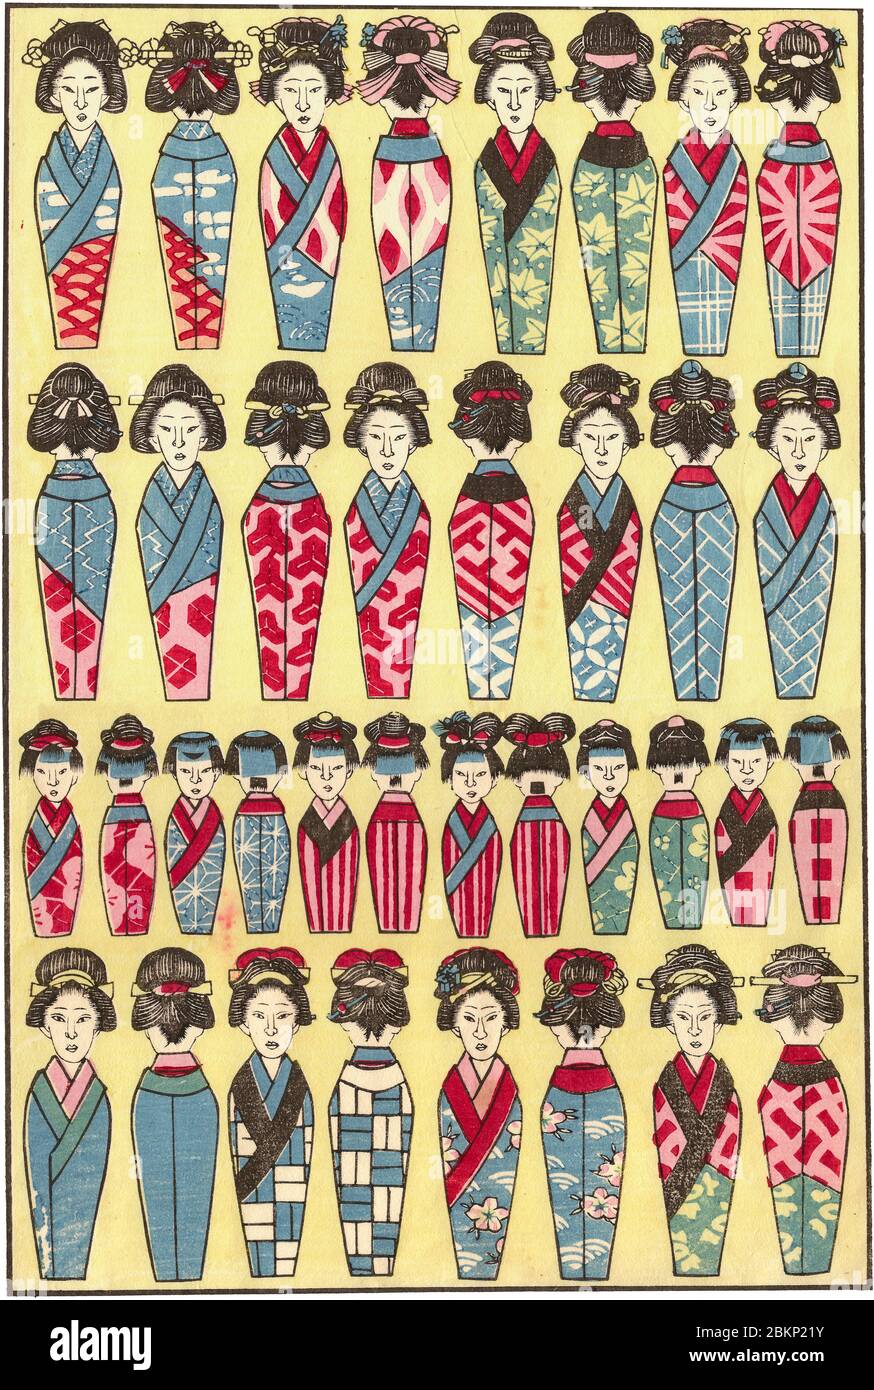 [ 1930s Japan - Woodblock Print of Women and Children ] —   Chiyogami (千代紙) displaying women and children with different hairstyles.  Chiyogami is paper decorated with brightly colored woodblock-printed patterns and themes first produced by Ukiyo-e artists in the late 18th century. The paper is very popular today for handicrafts and creating kimono for paper dolls.  20th century vintage Ukiyoe woodblock print. Stock Photo